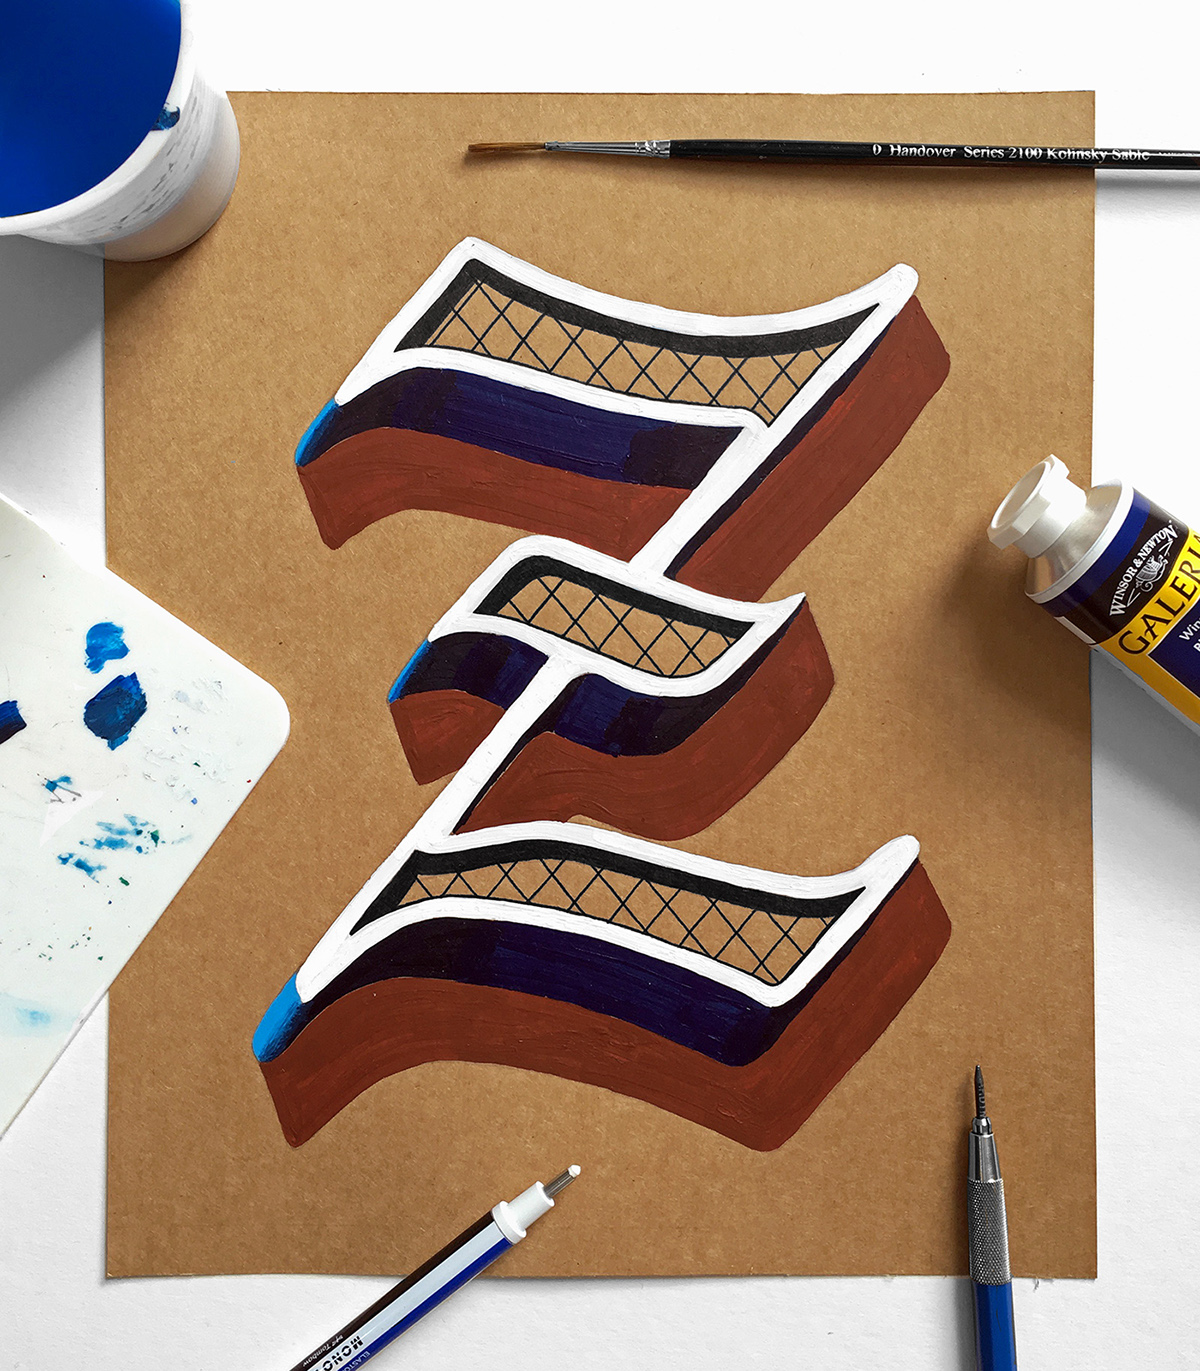 Calligraphy & Hand Lettering »